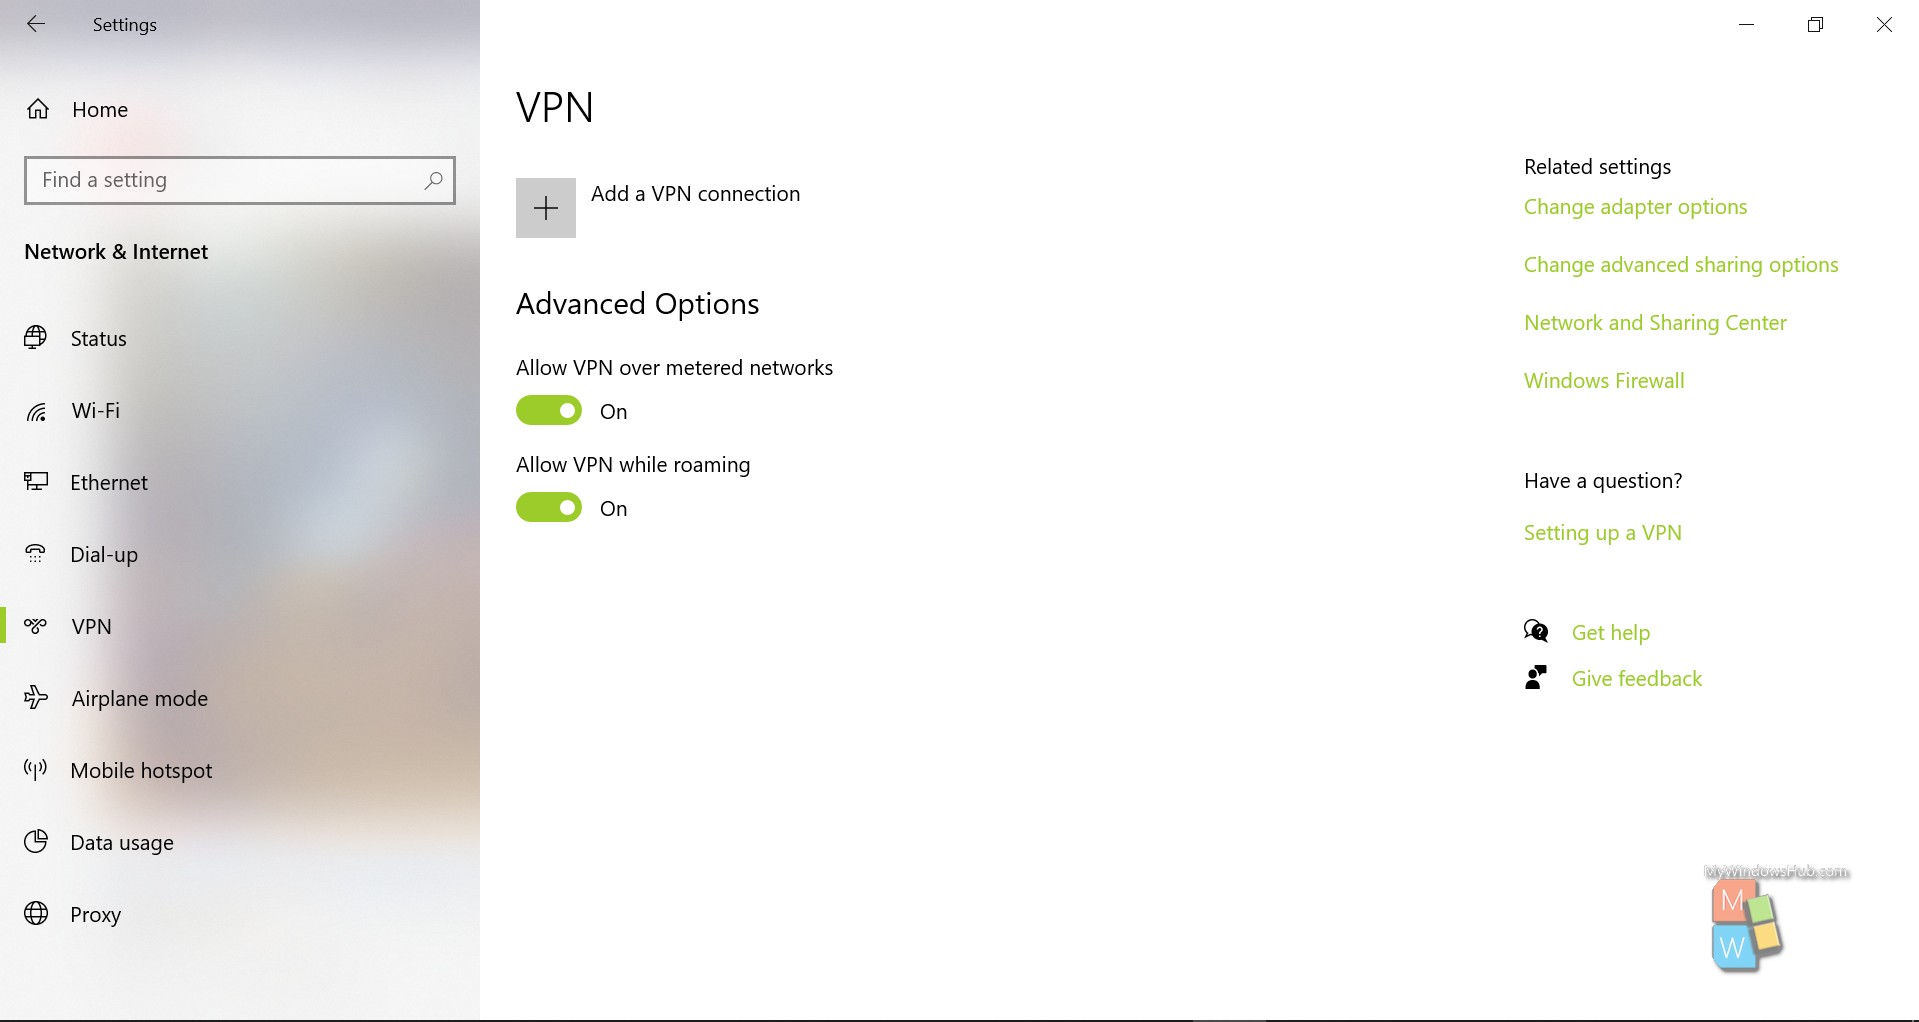 How To Enable/Disable VPN Page In Settings In Windows 10?